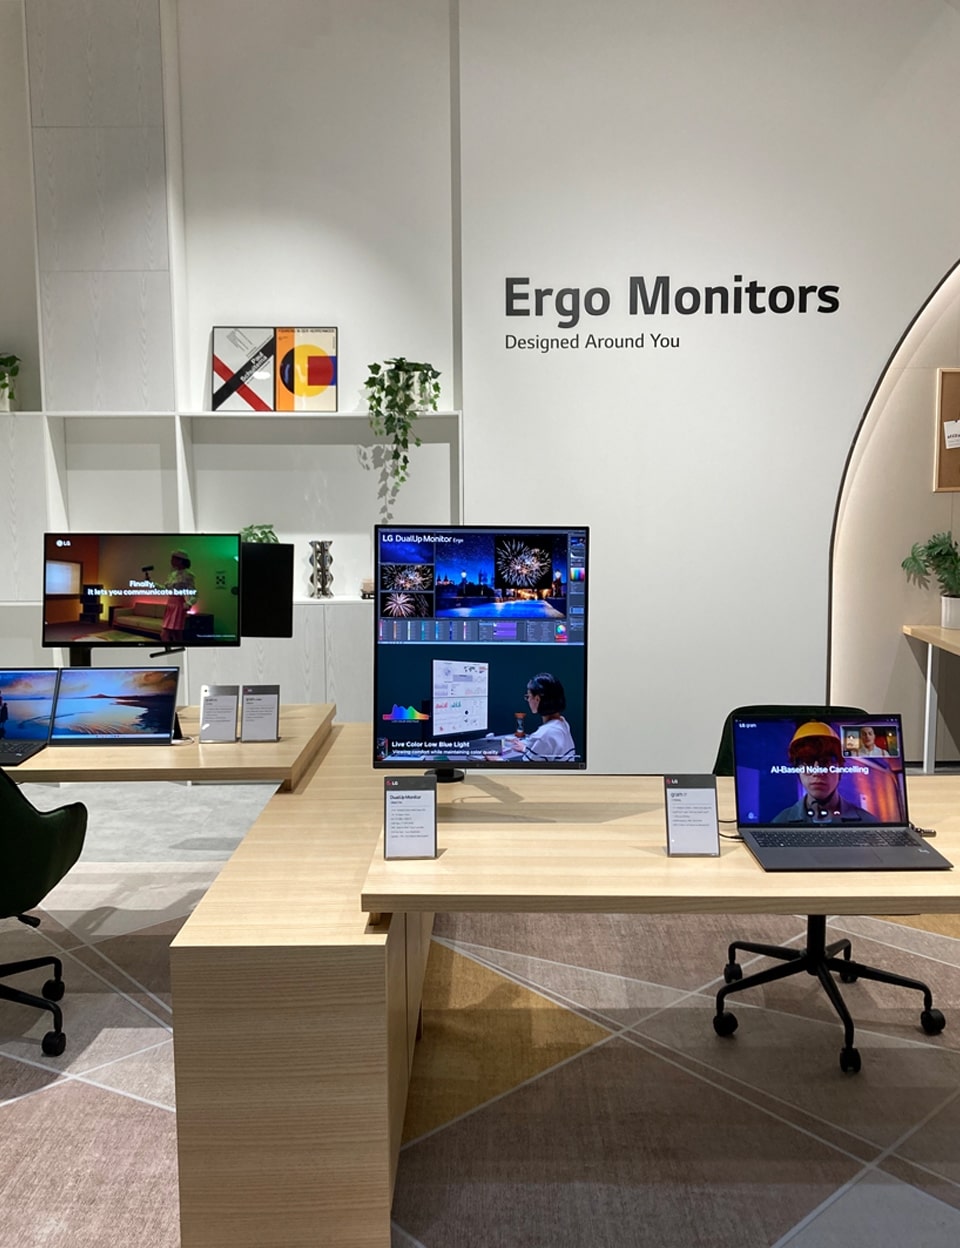 An LG Ergo AI monitor is adjusted to the correct monitor height and distance